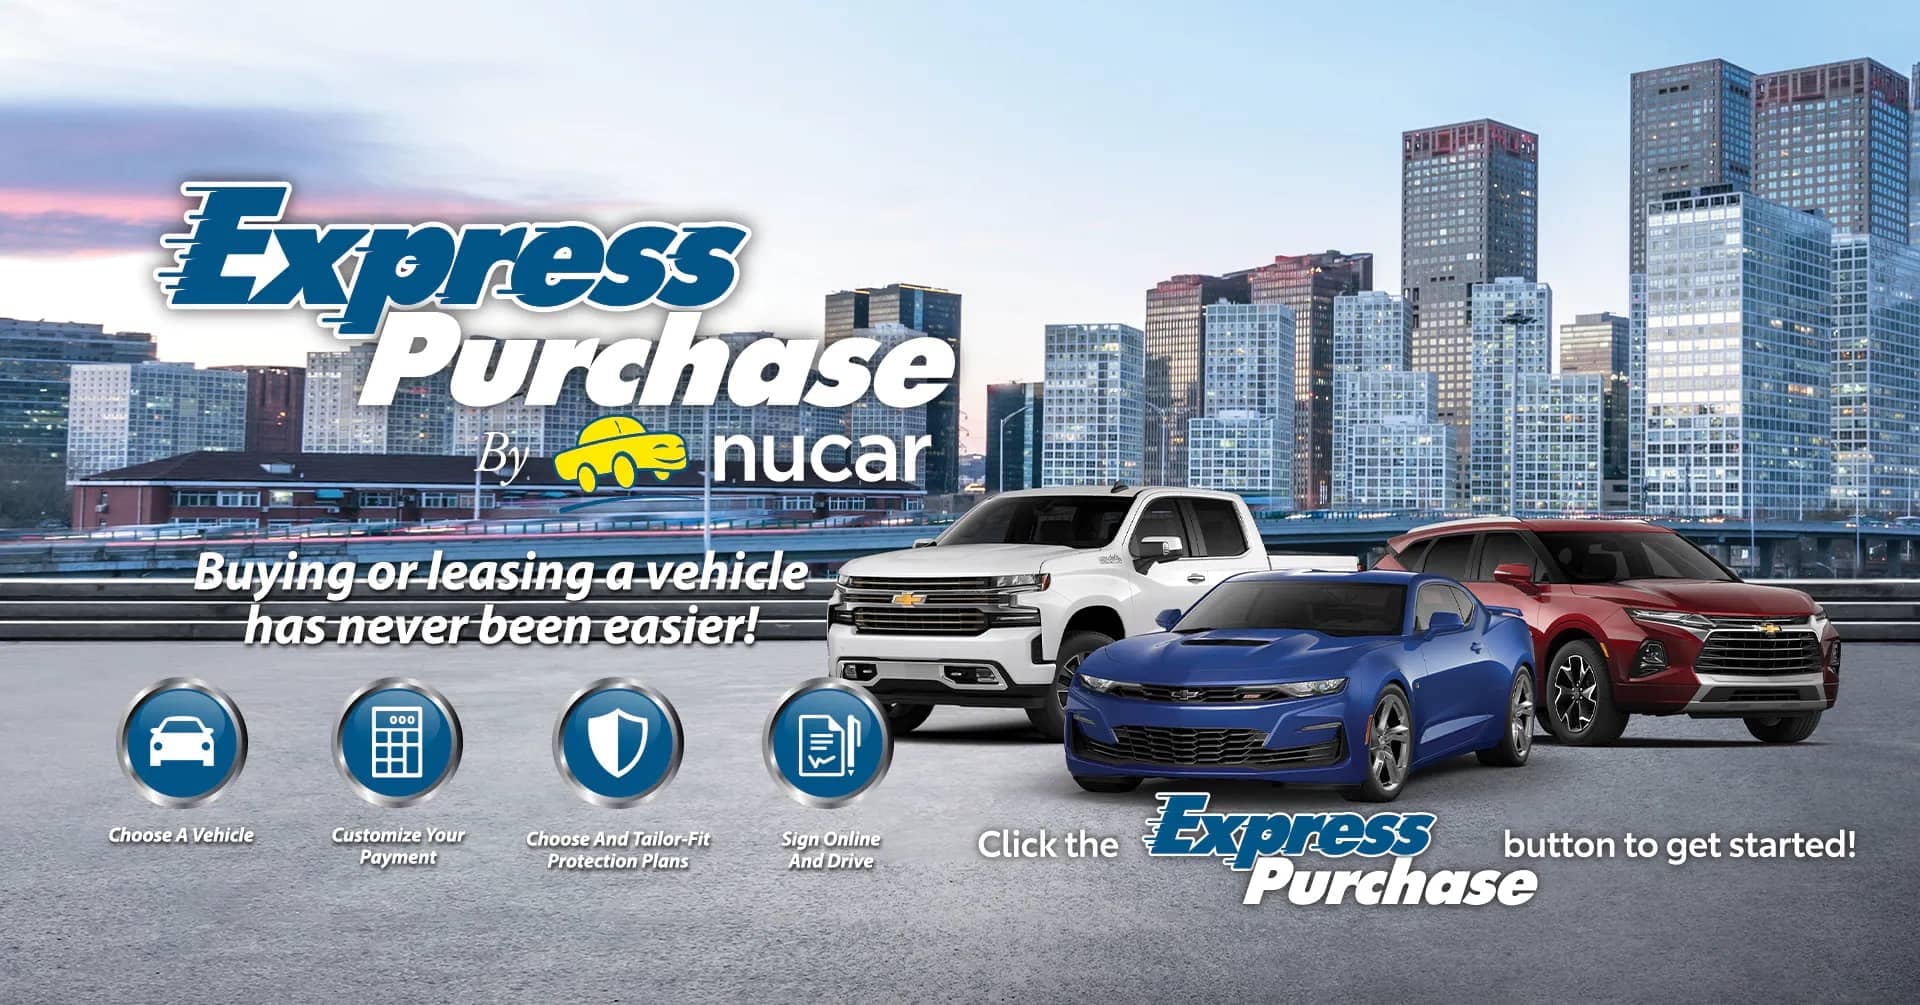 Express Purchase by Nucar